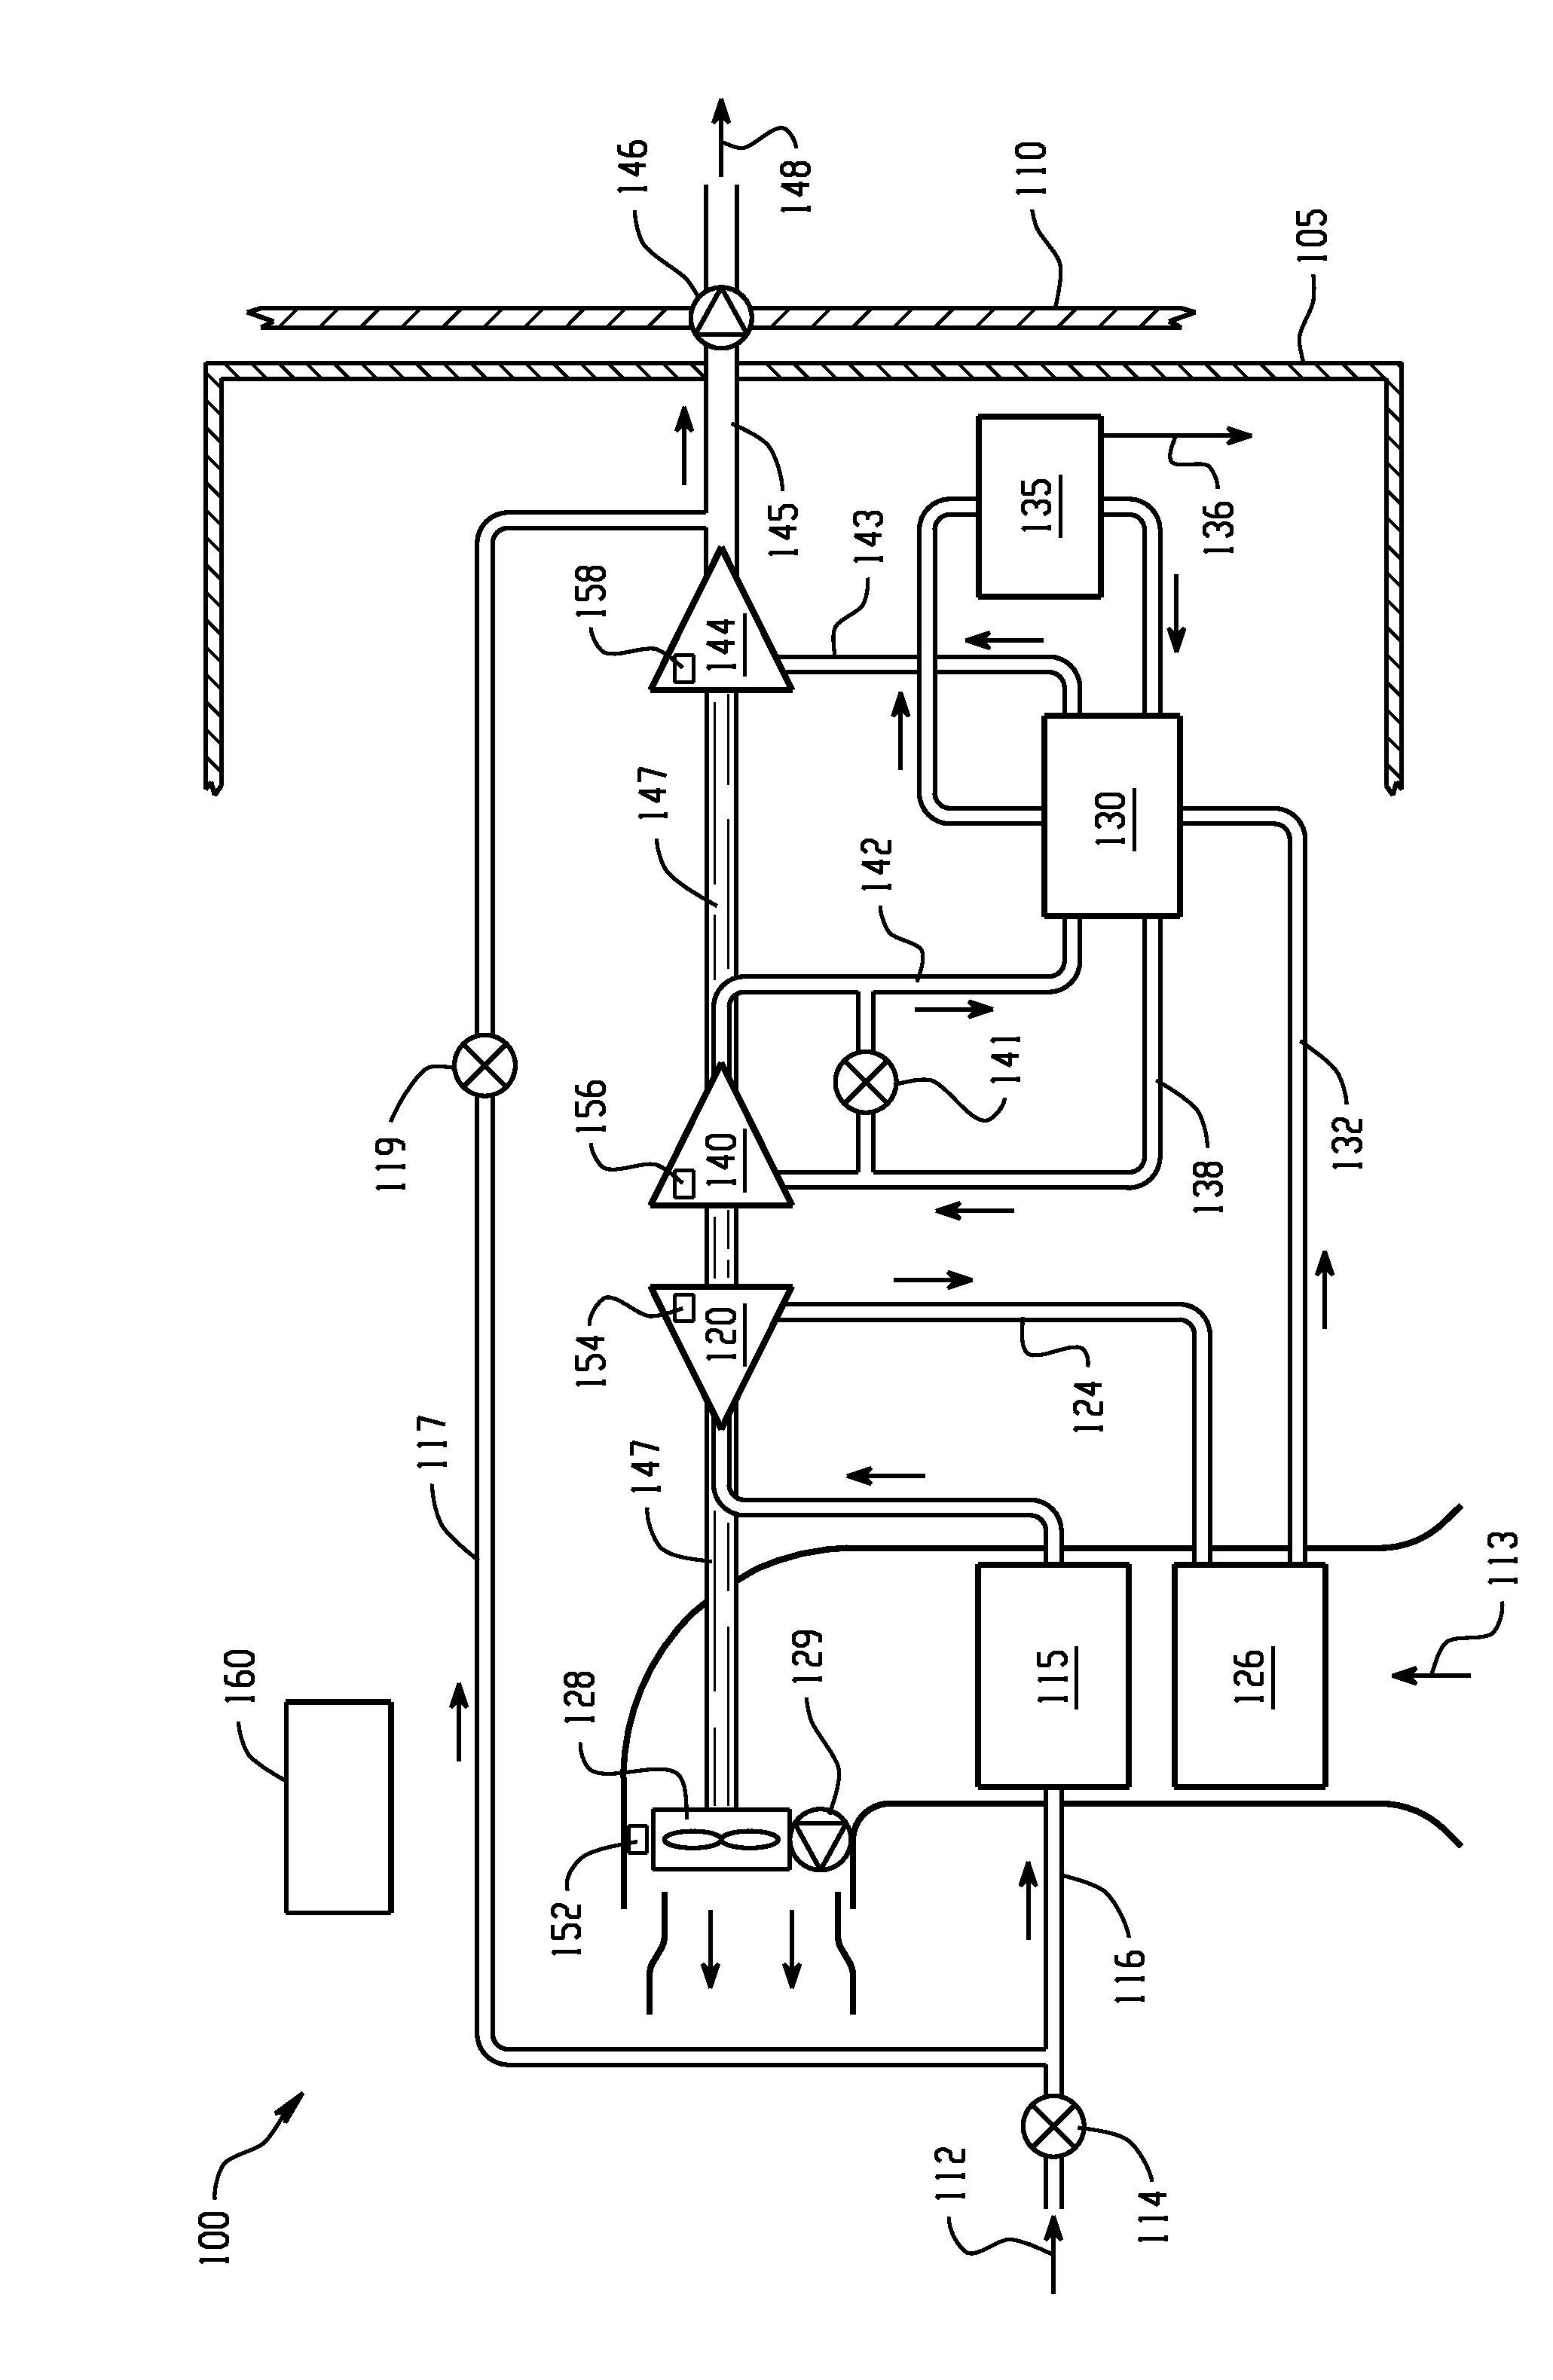 Aircraft environmental conditioning system and method